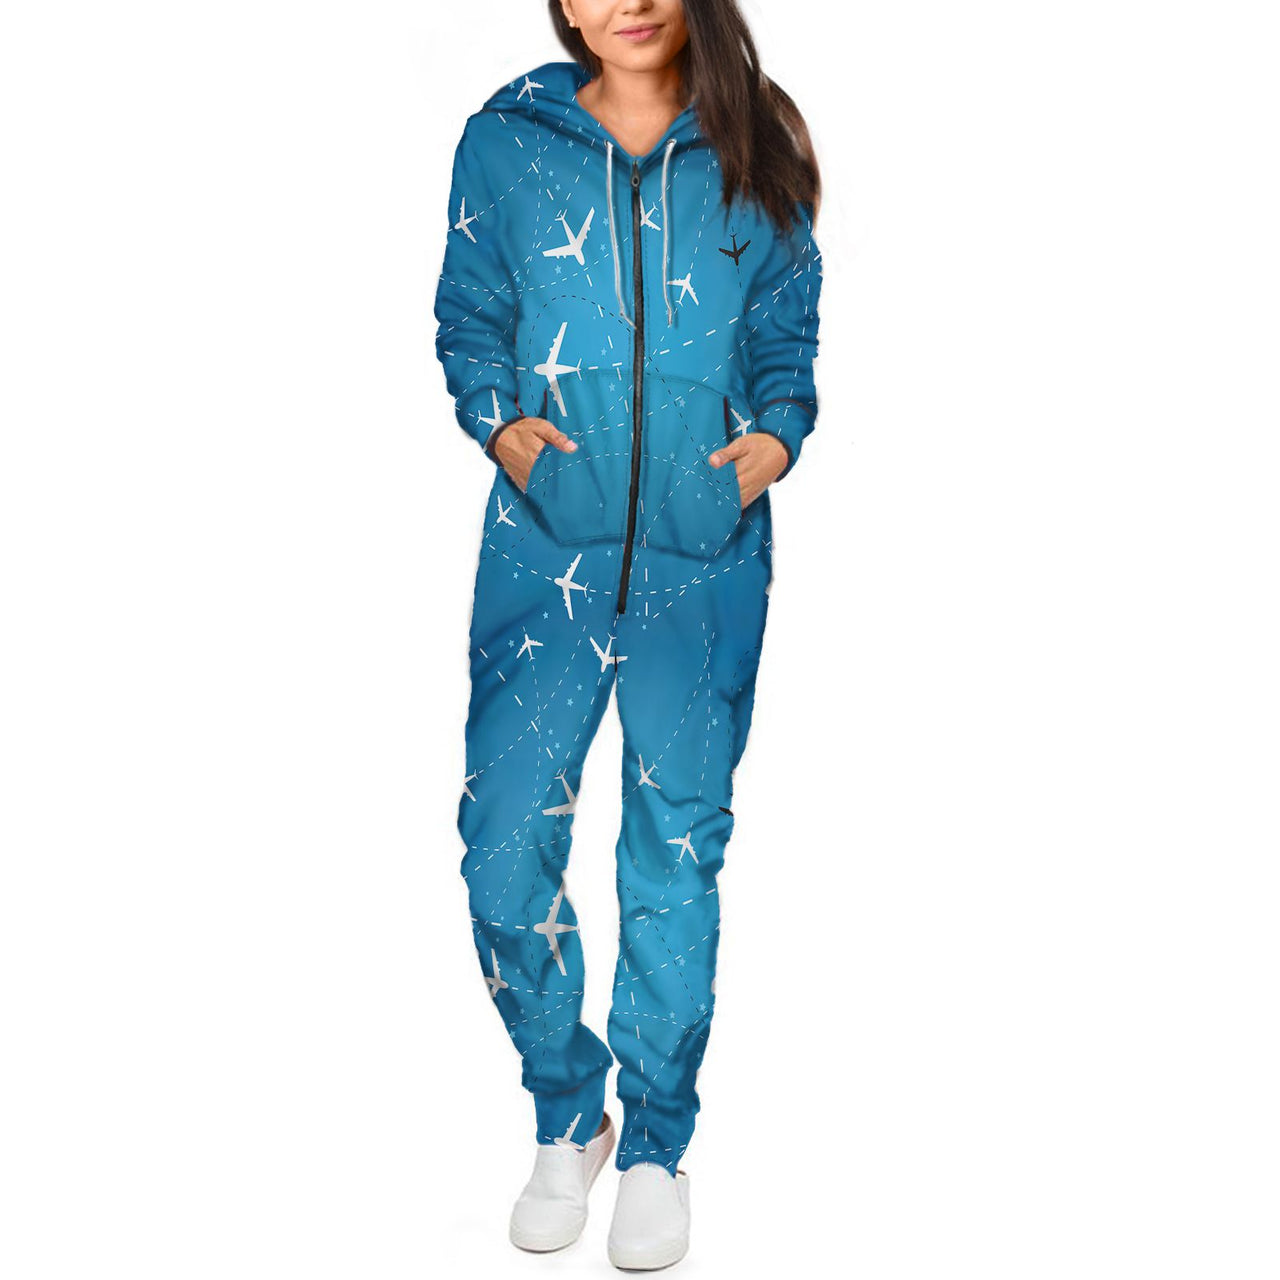 Travelling with Aircraft Designed Jumpsuit for Men & Women